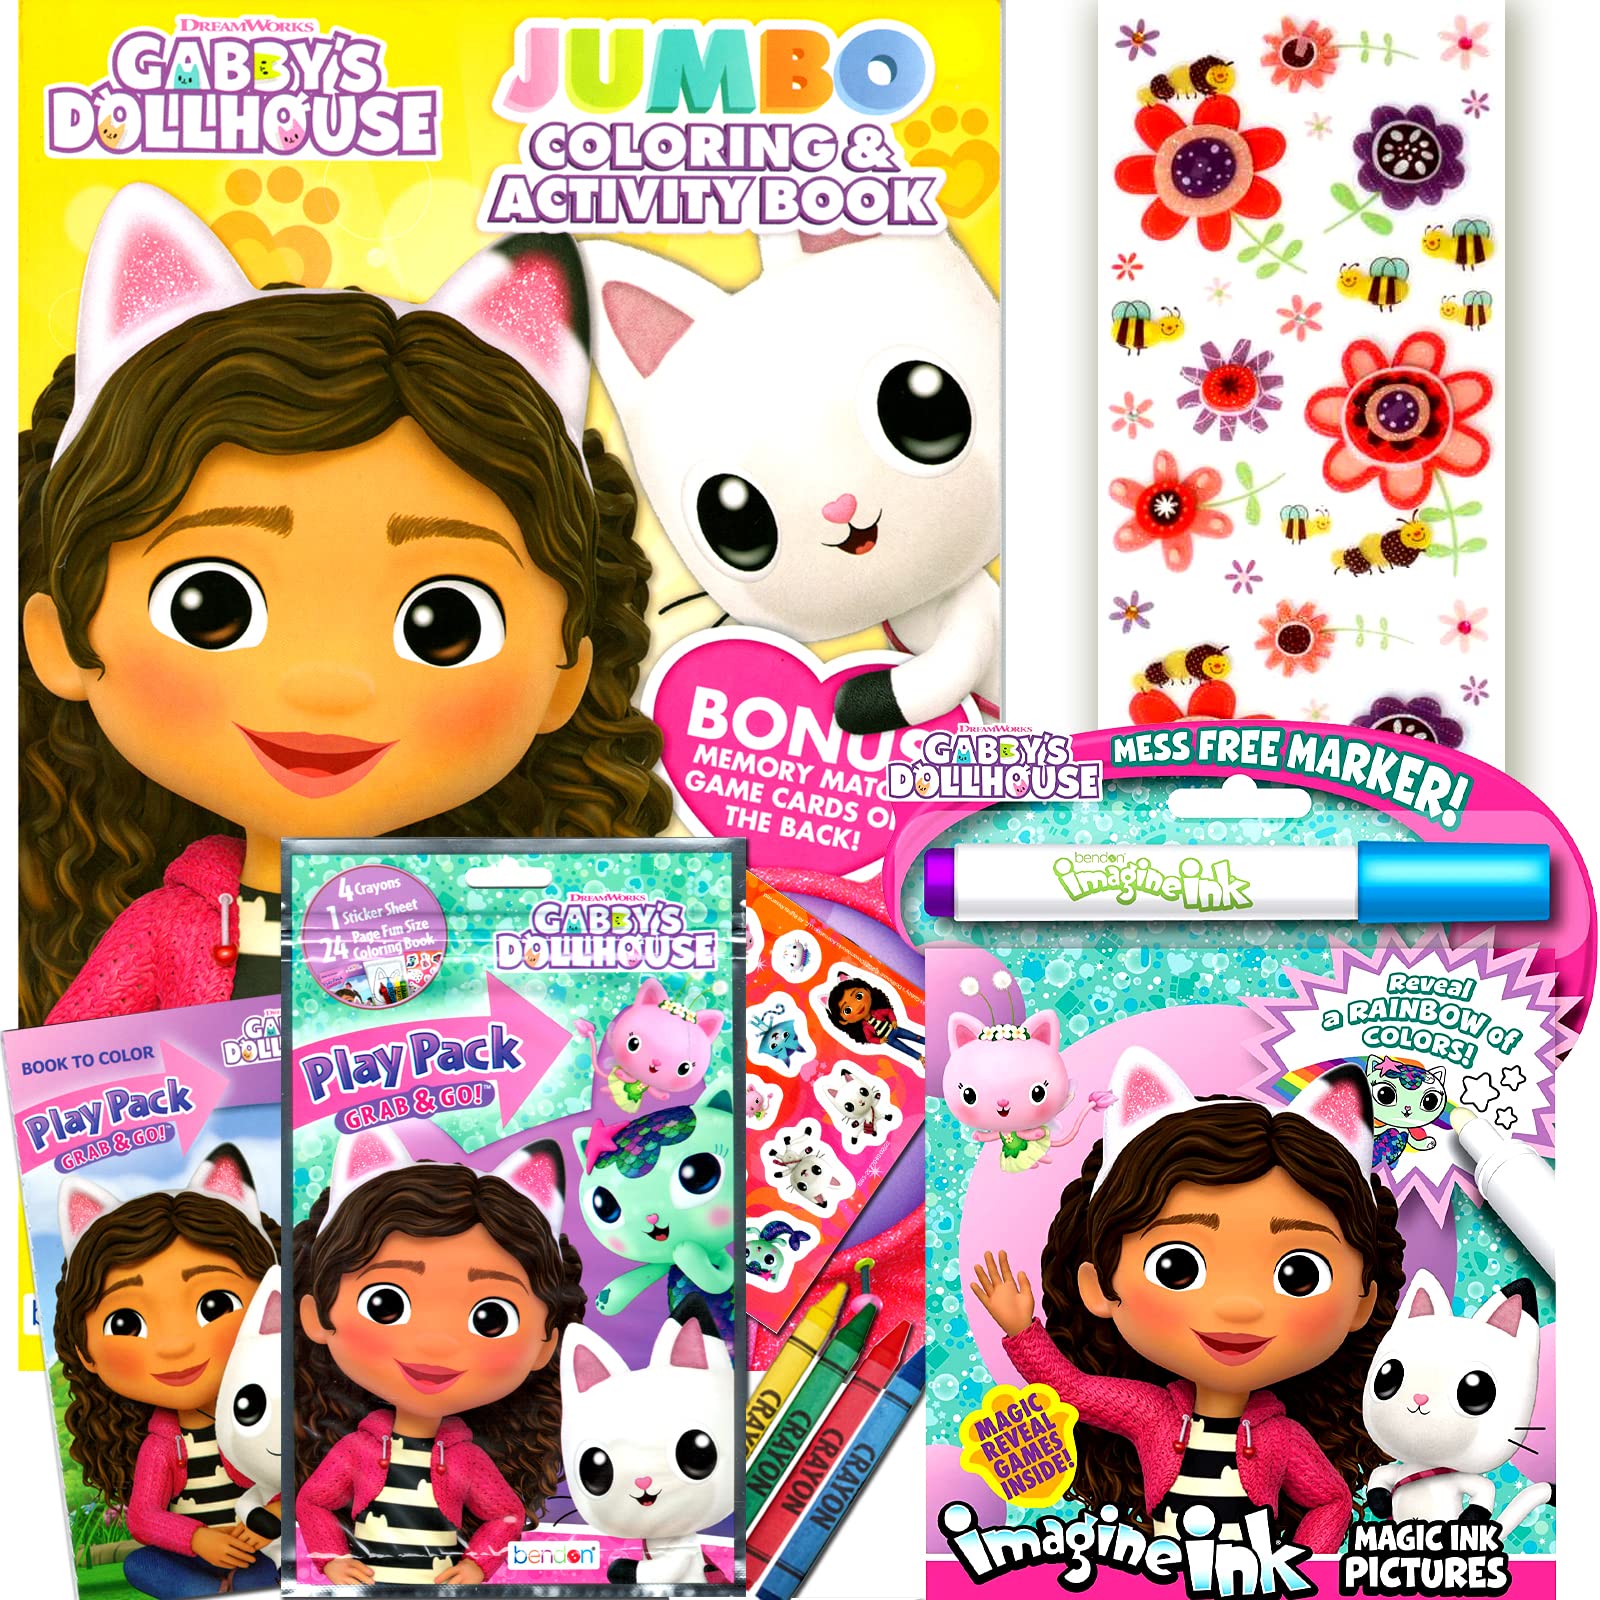 Gabbys dollhouse coloring and activity books bundle with imagine ink coloring book play pack stickers and more toys games